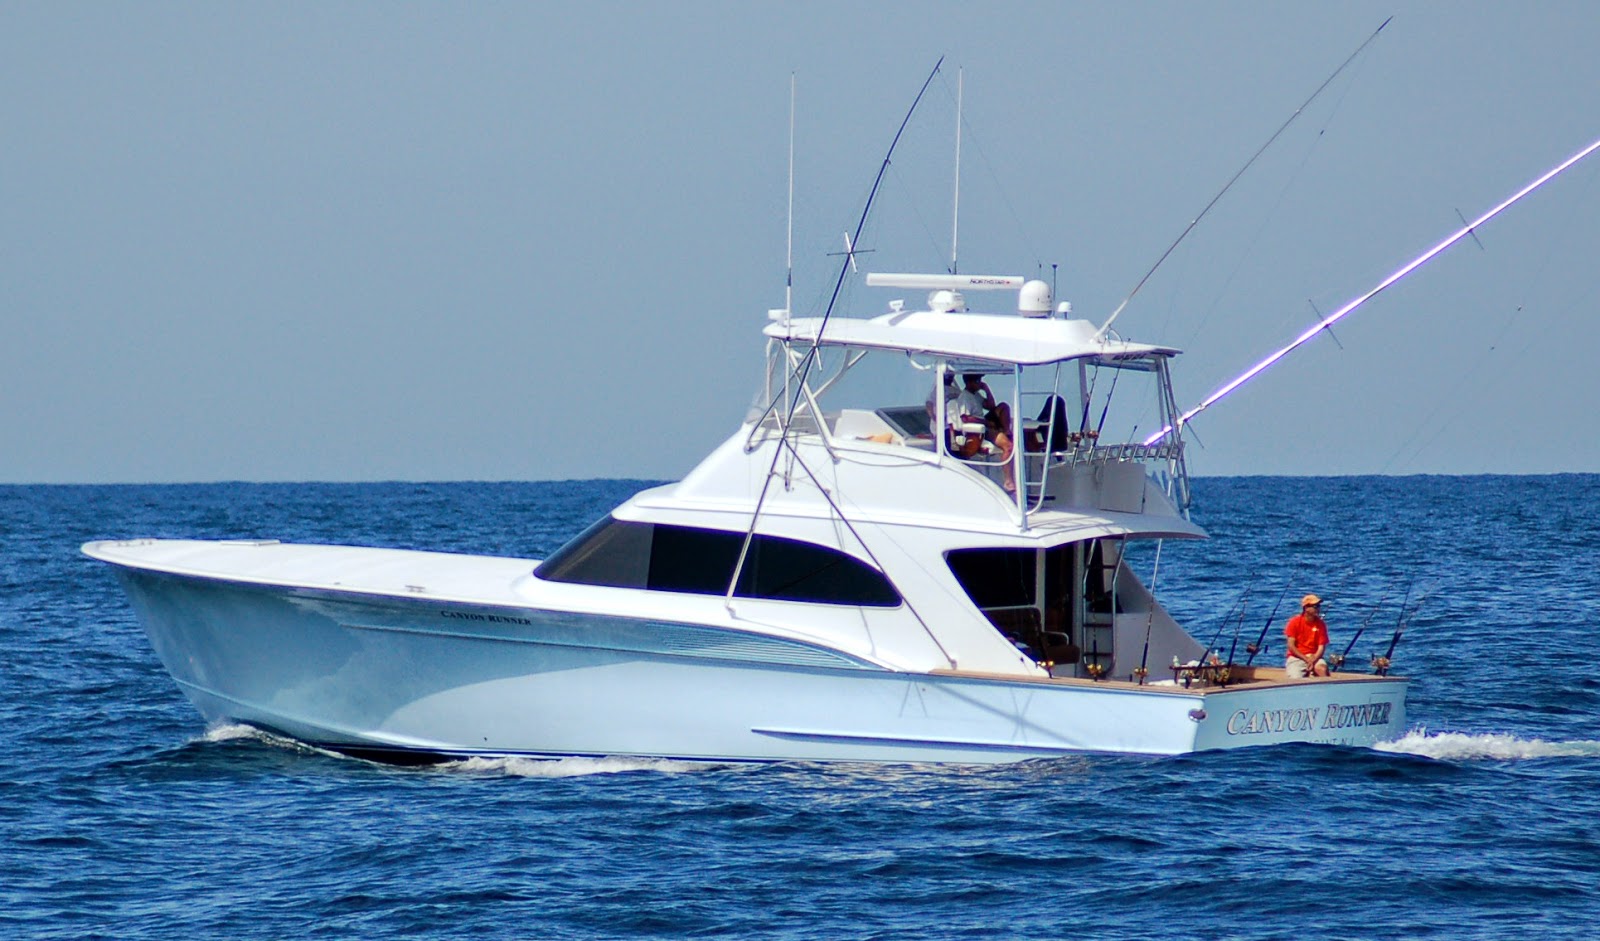 Travel and Leisure: Factors to Consider When Buying Charter Boats